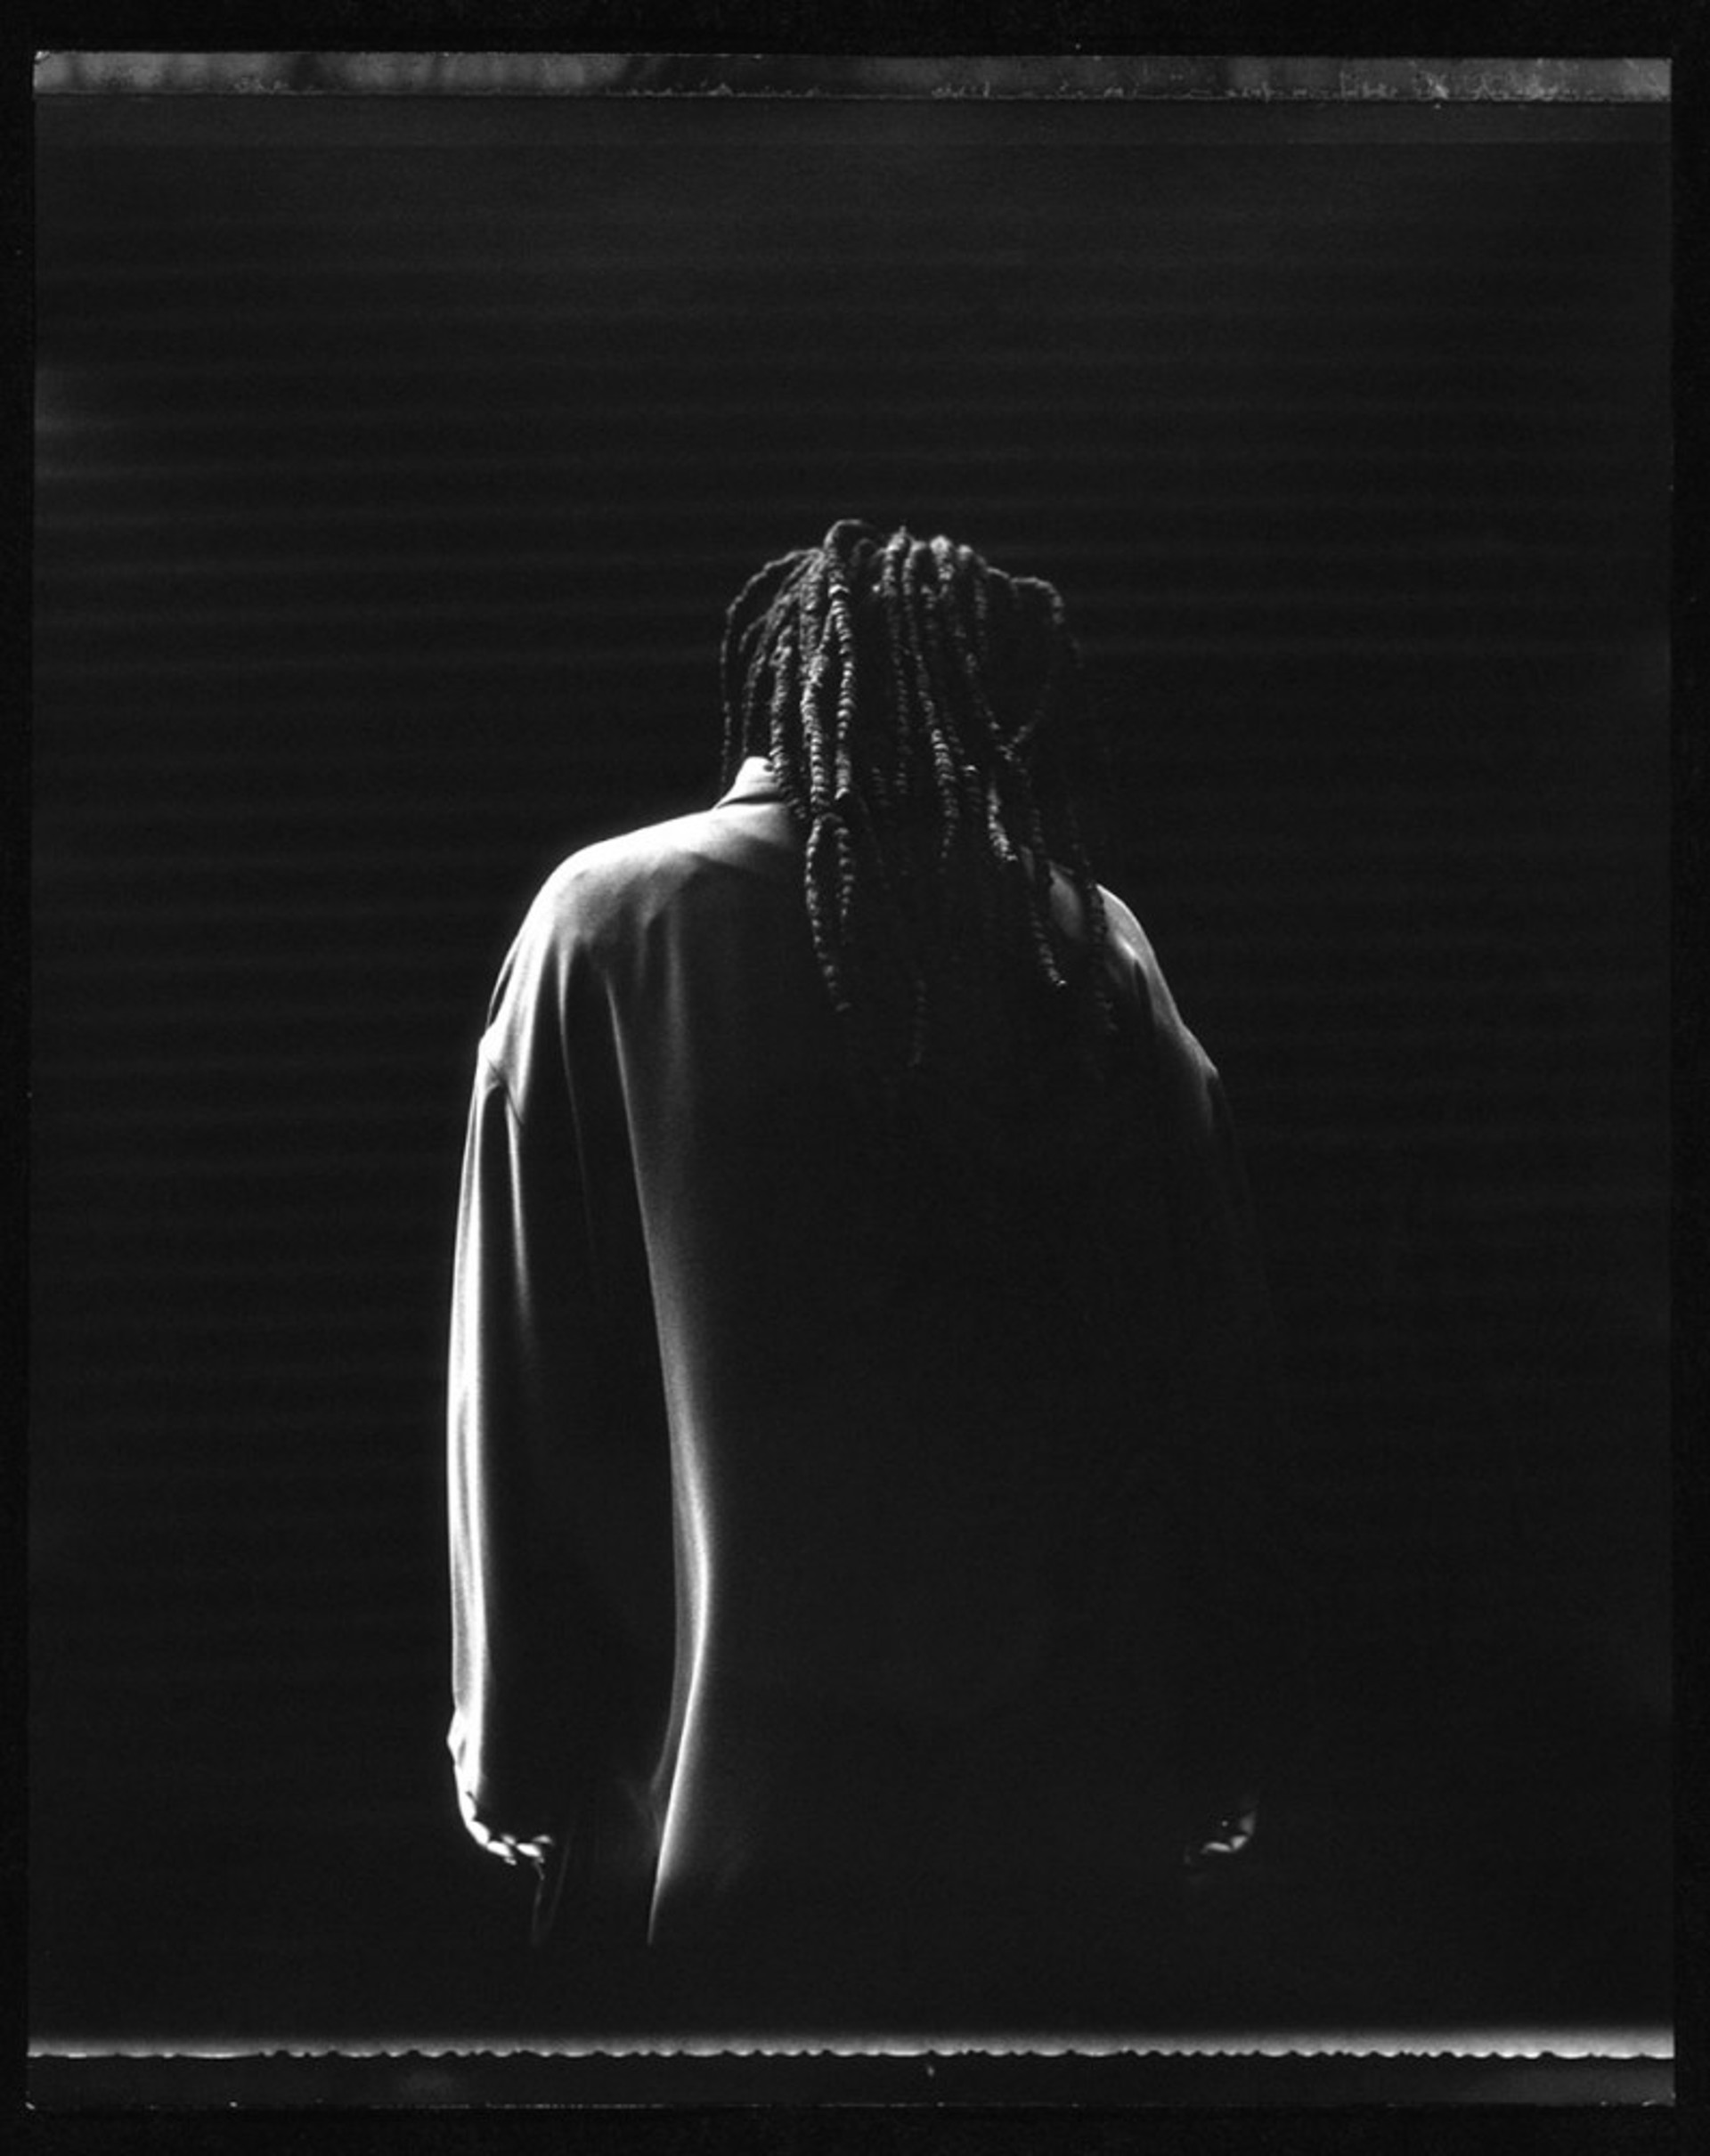 96115 Whoopi Goldberg Back to You Dreads BW by Timothy White